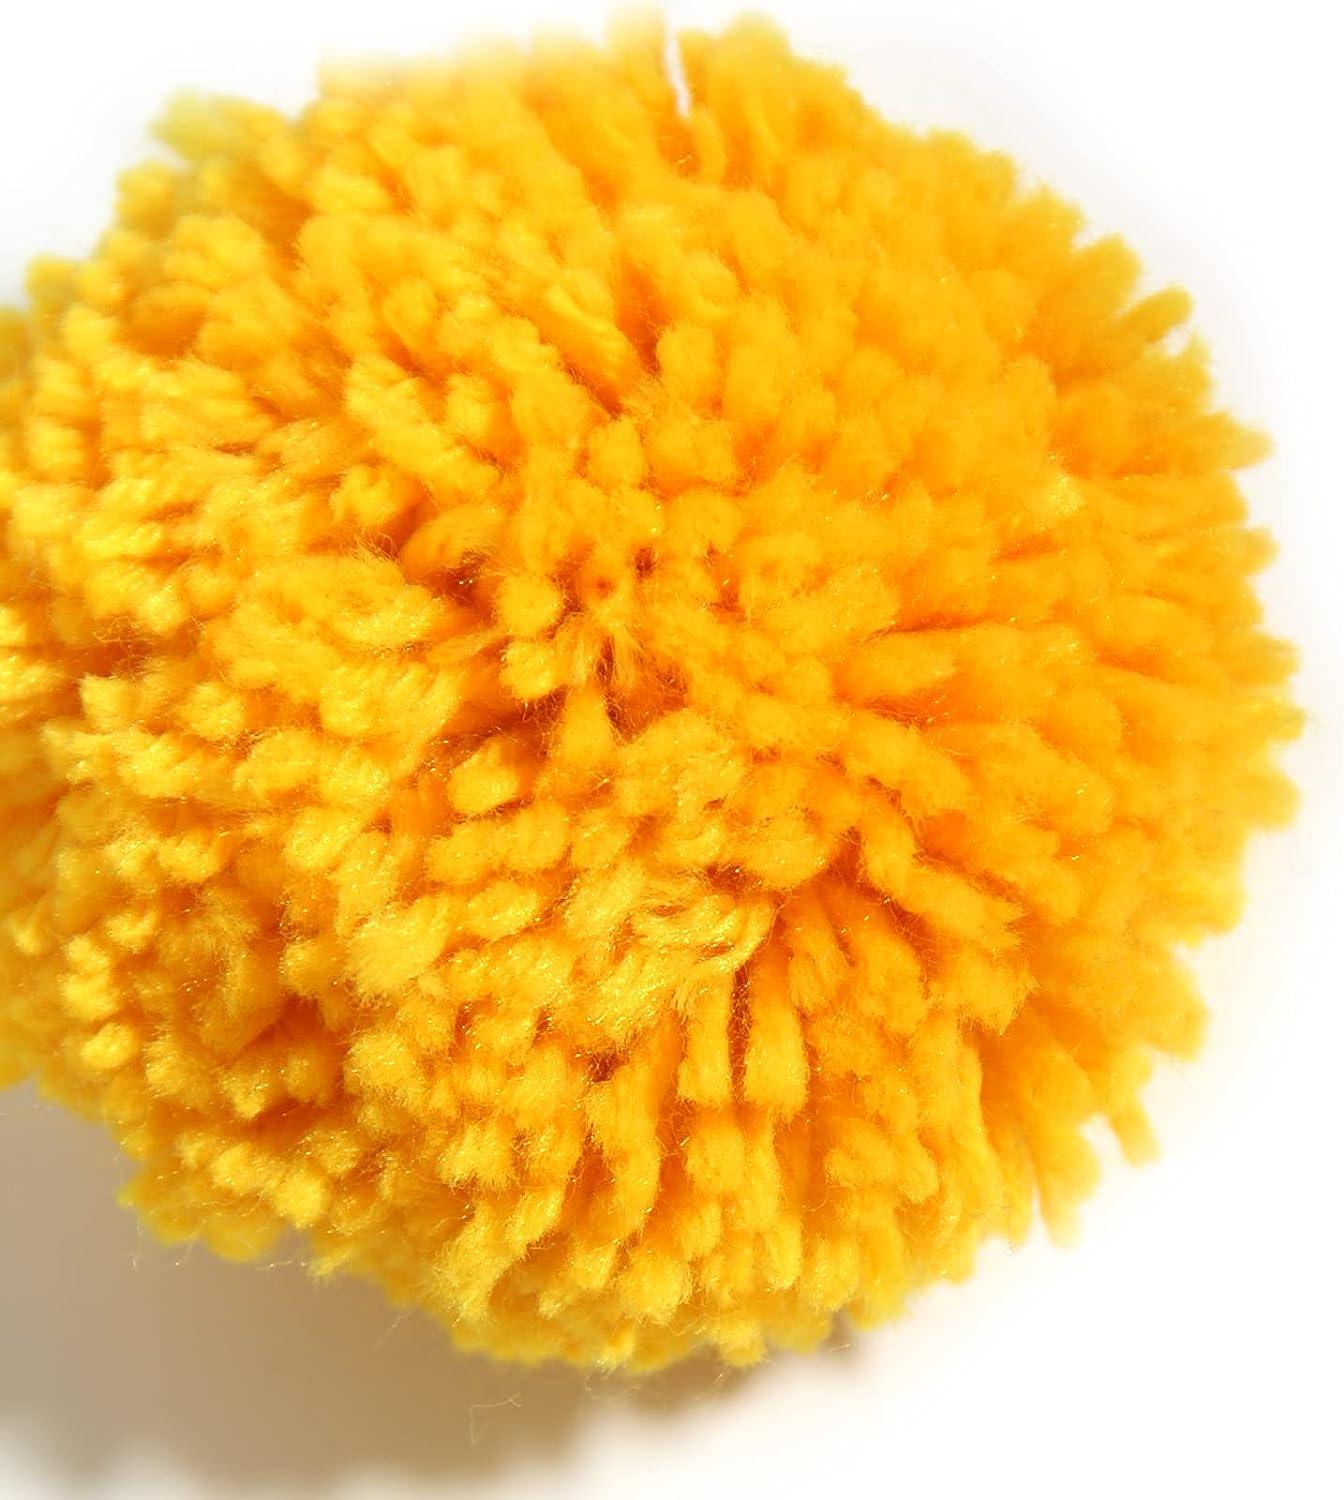  10Pcs Large Yarn Pom Poms - 3 Inch Made to Order Acrylic Yarn  Balls for on Hats Or Party Decorations-DIY Craft Pompoms,Colorful Pom Pom  Balls,Luggage Pom Poms for Suitcases,Extra Large Pom